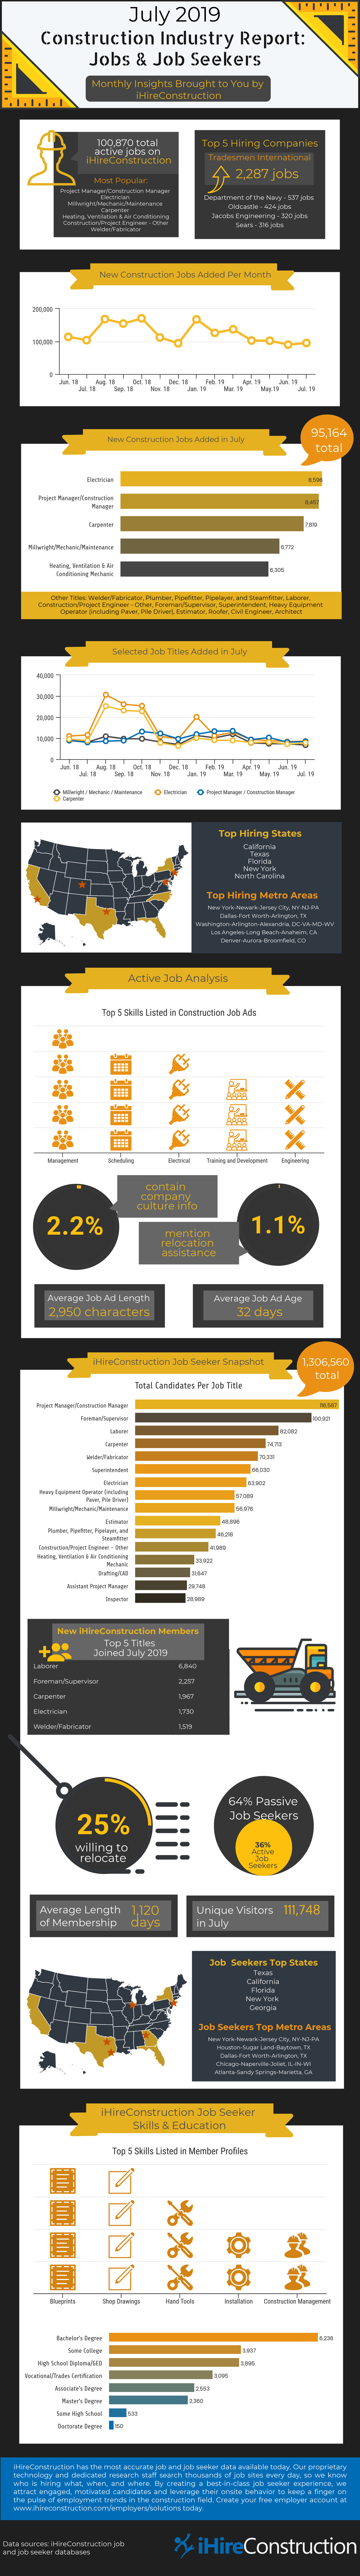 iHireConstruction's July 2019 industry report on construction jobs and job seekers. Infographic.